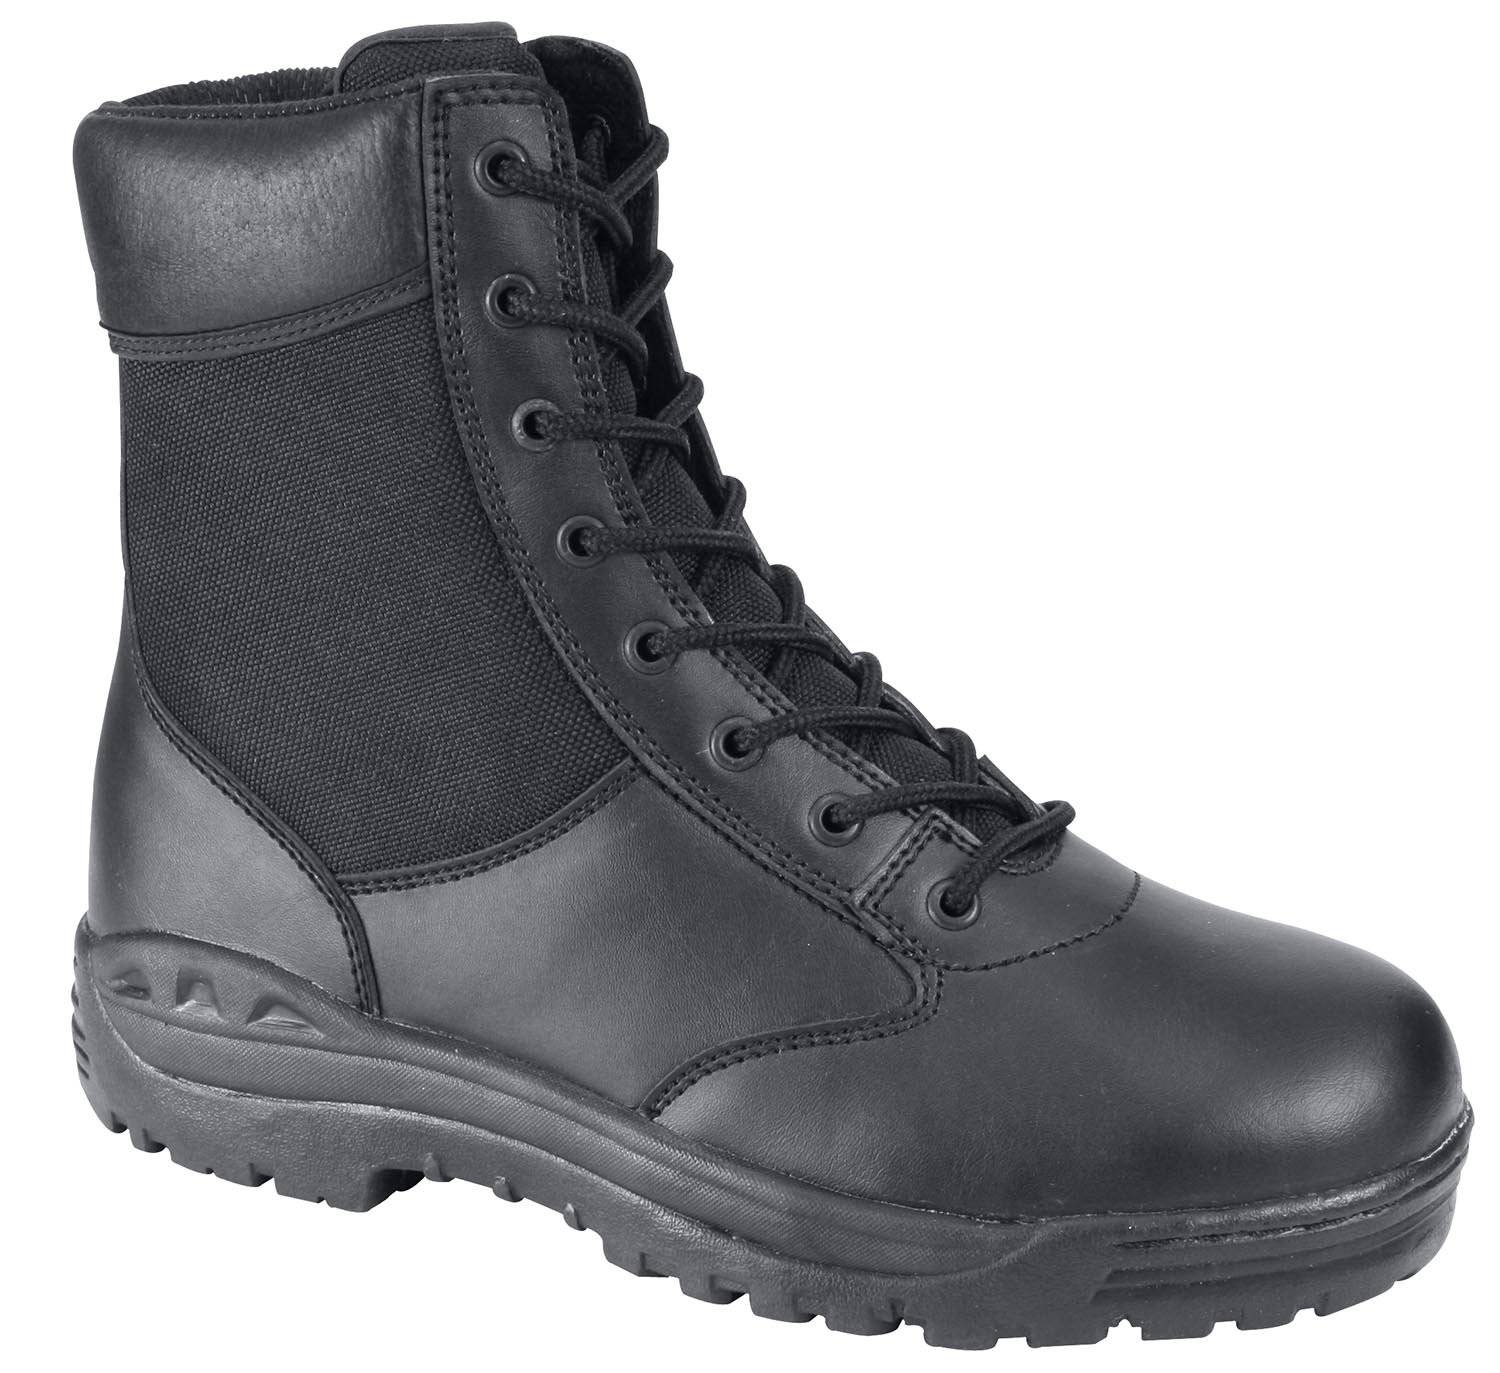 Rothco 8" Forced Entry Security Boots